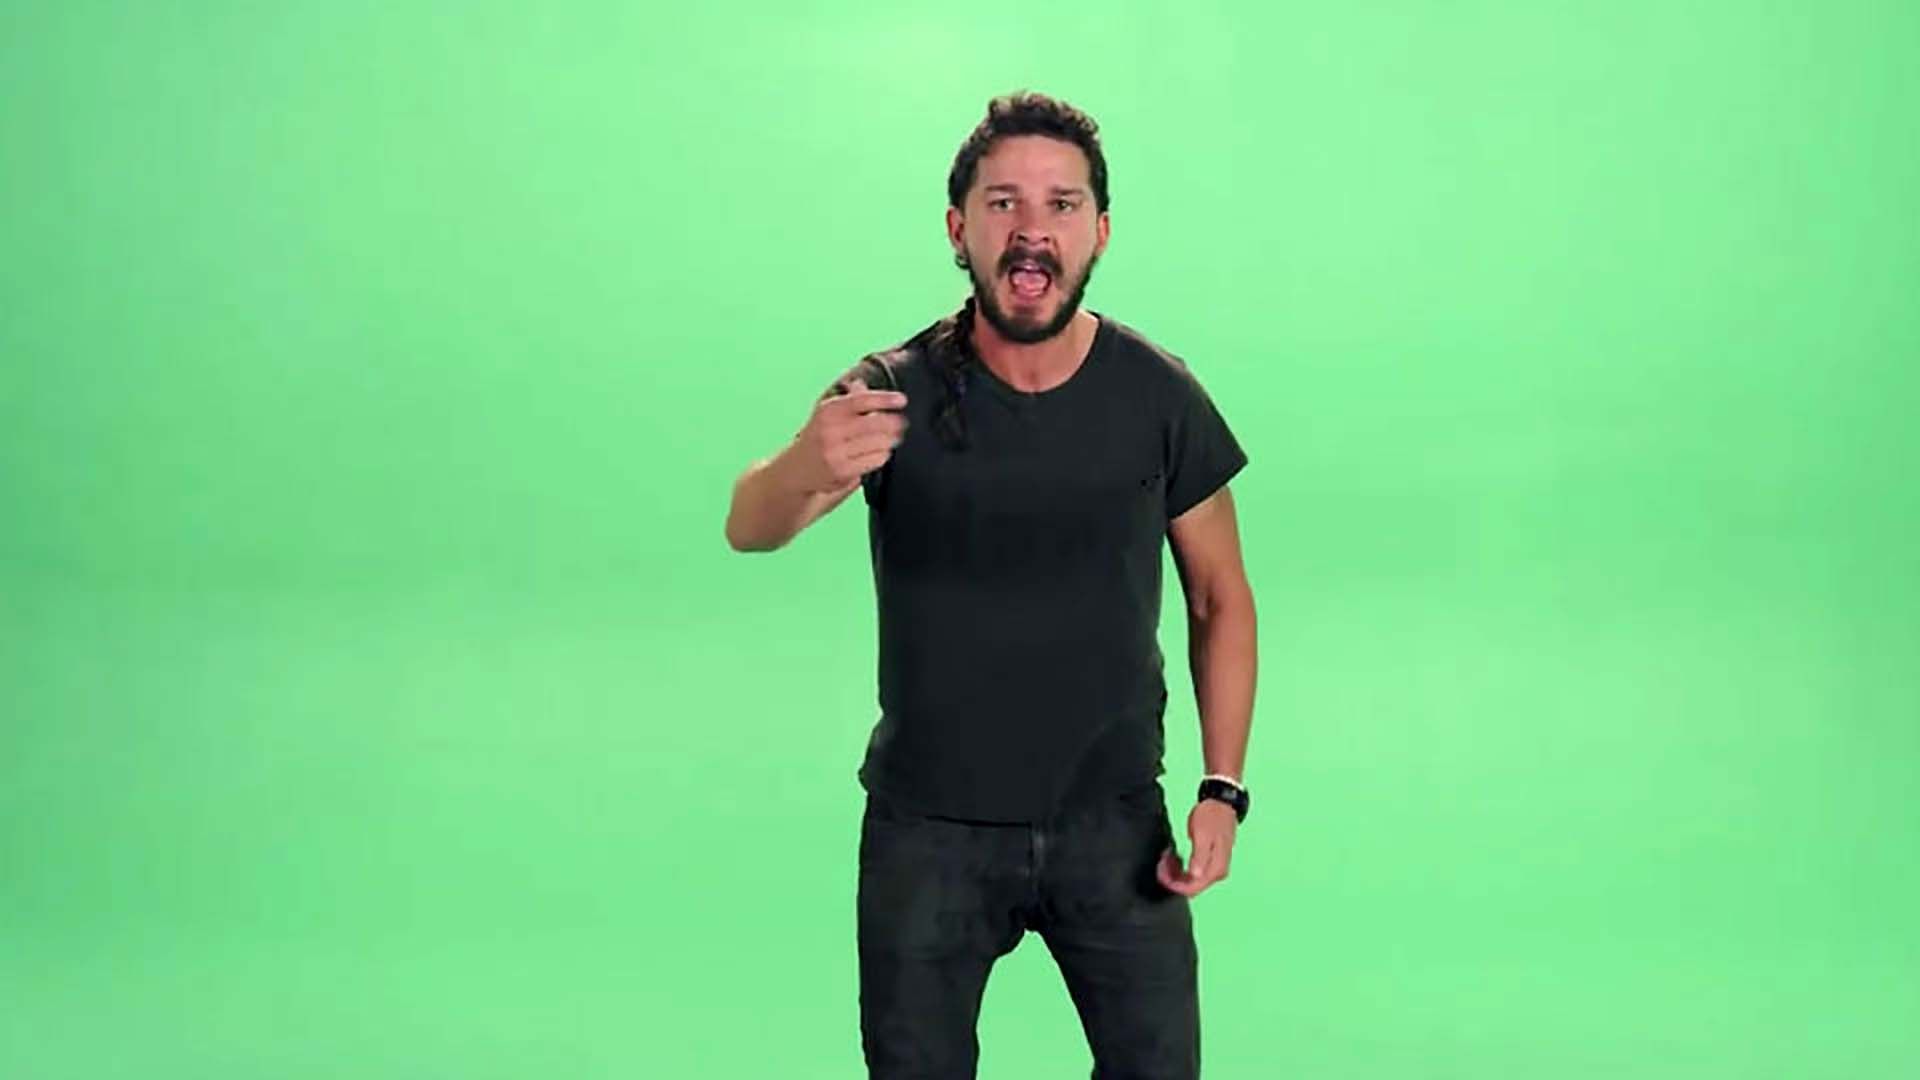 Shia LaBeoufs intense motivational speech has truly inspired the